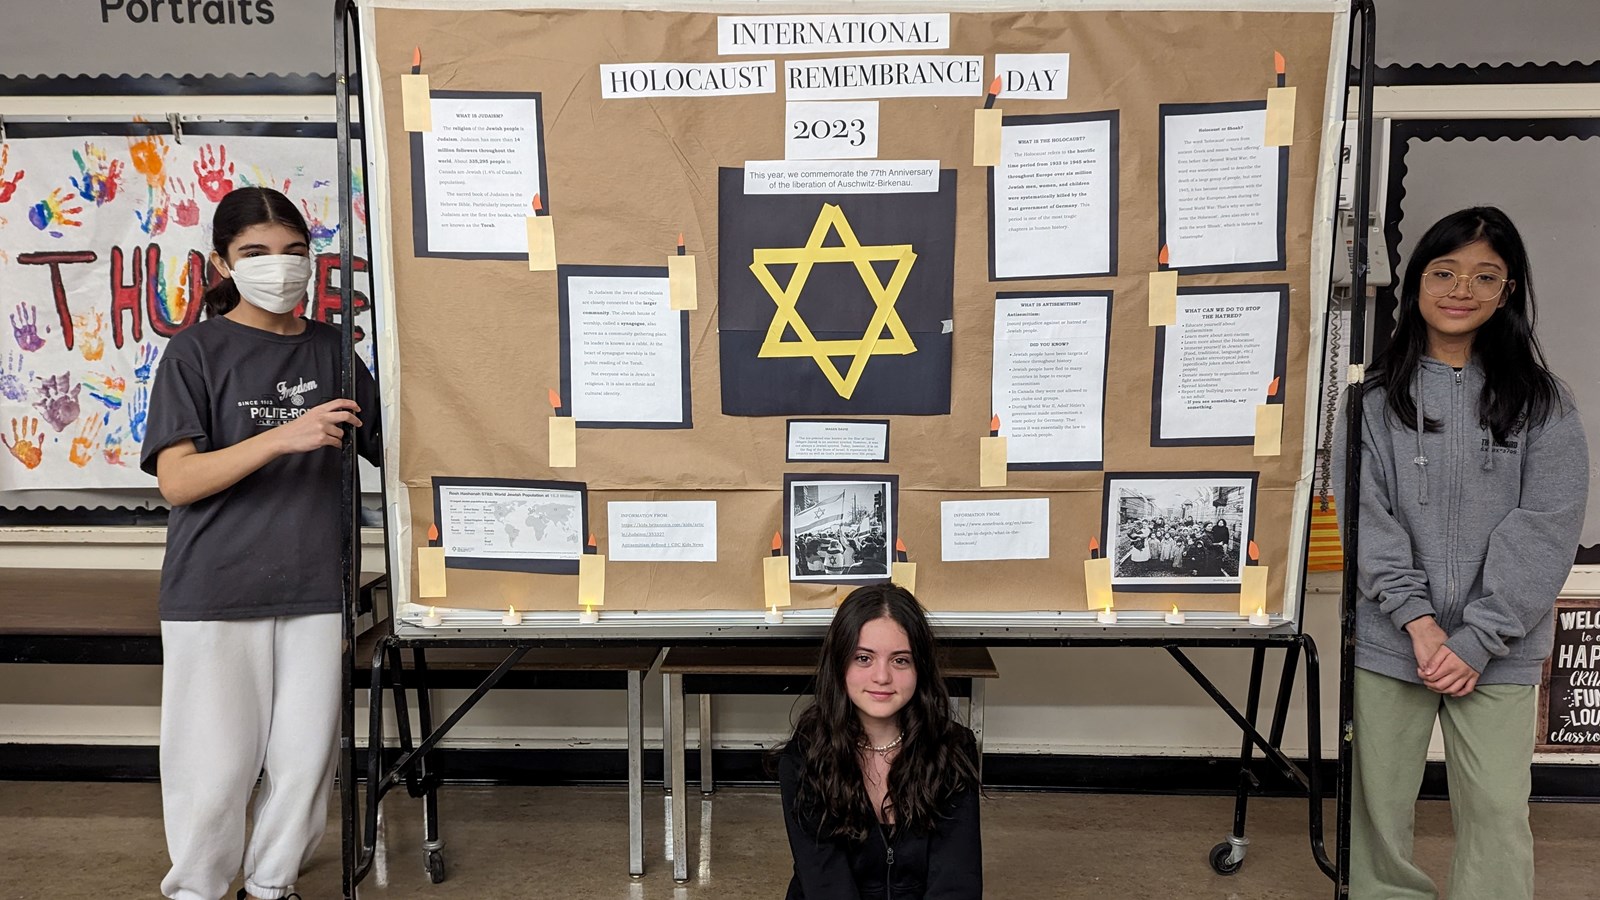 Thunderbird Elementary students create information board for International Holocaust Remembrance Day 